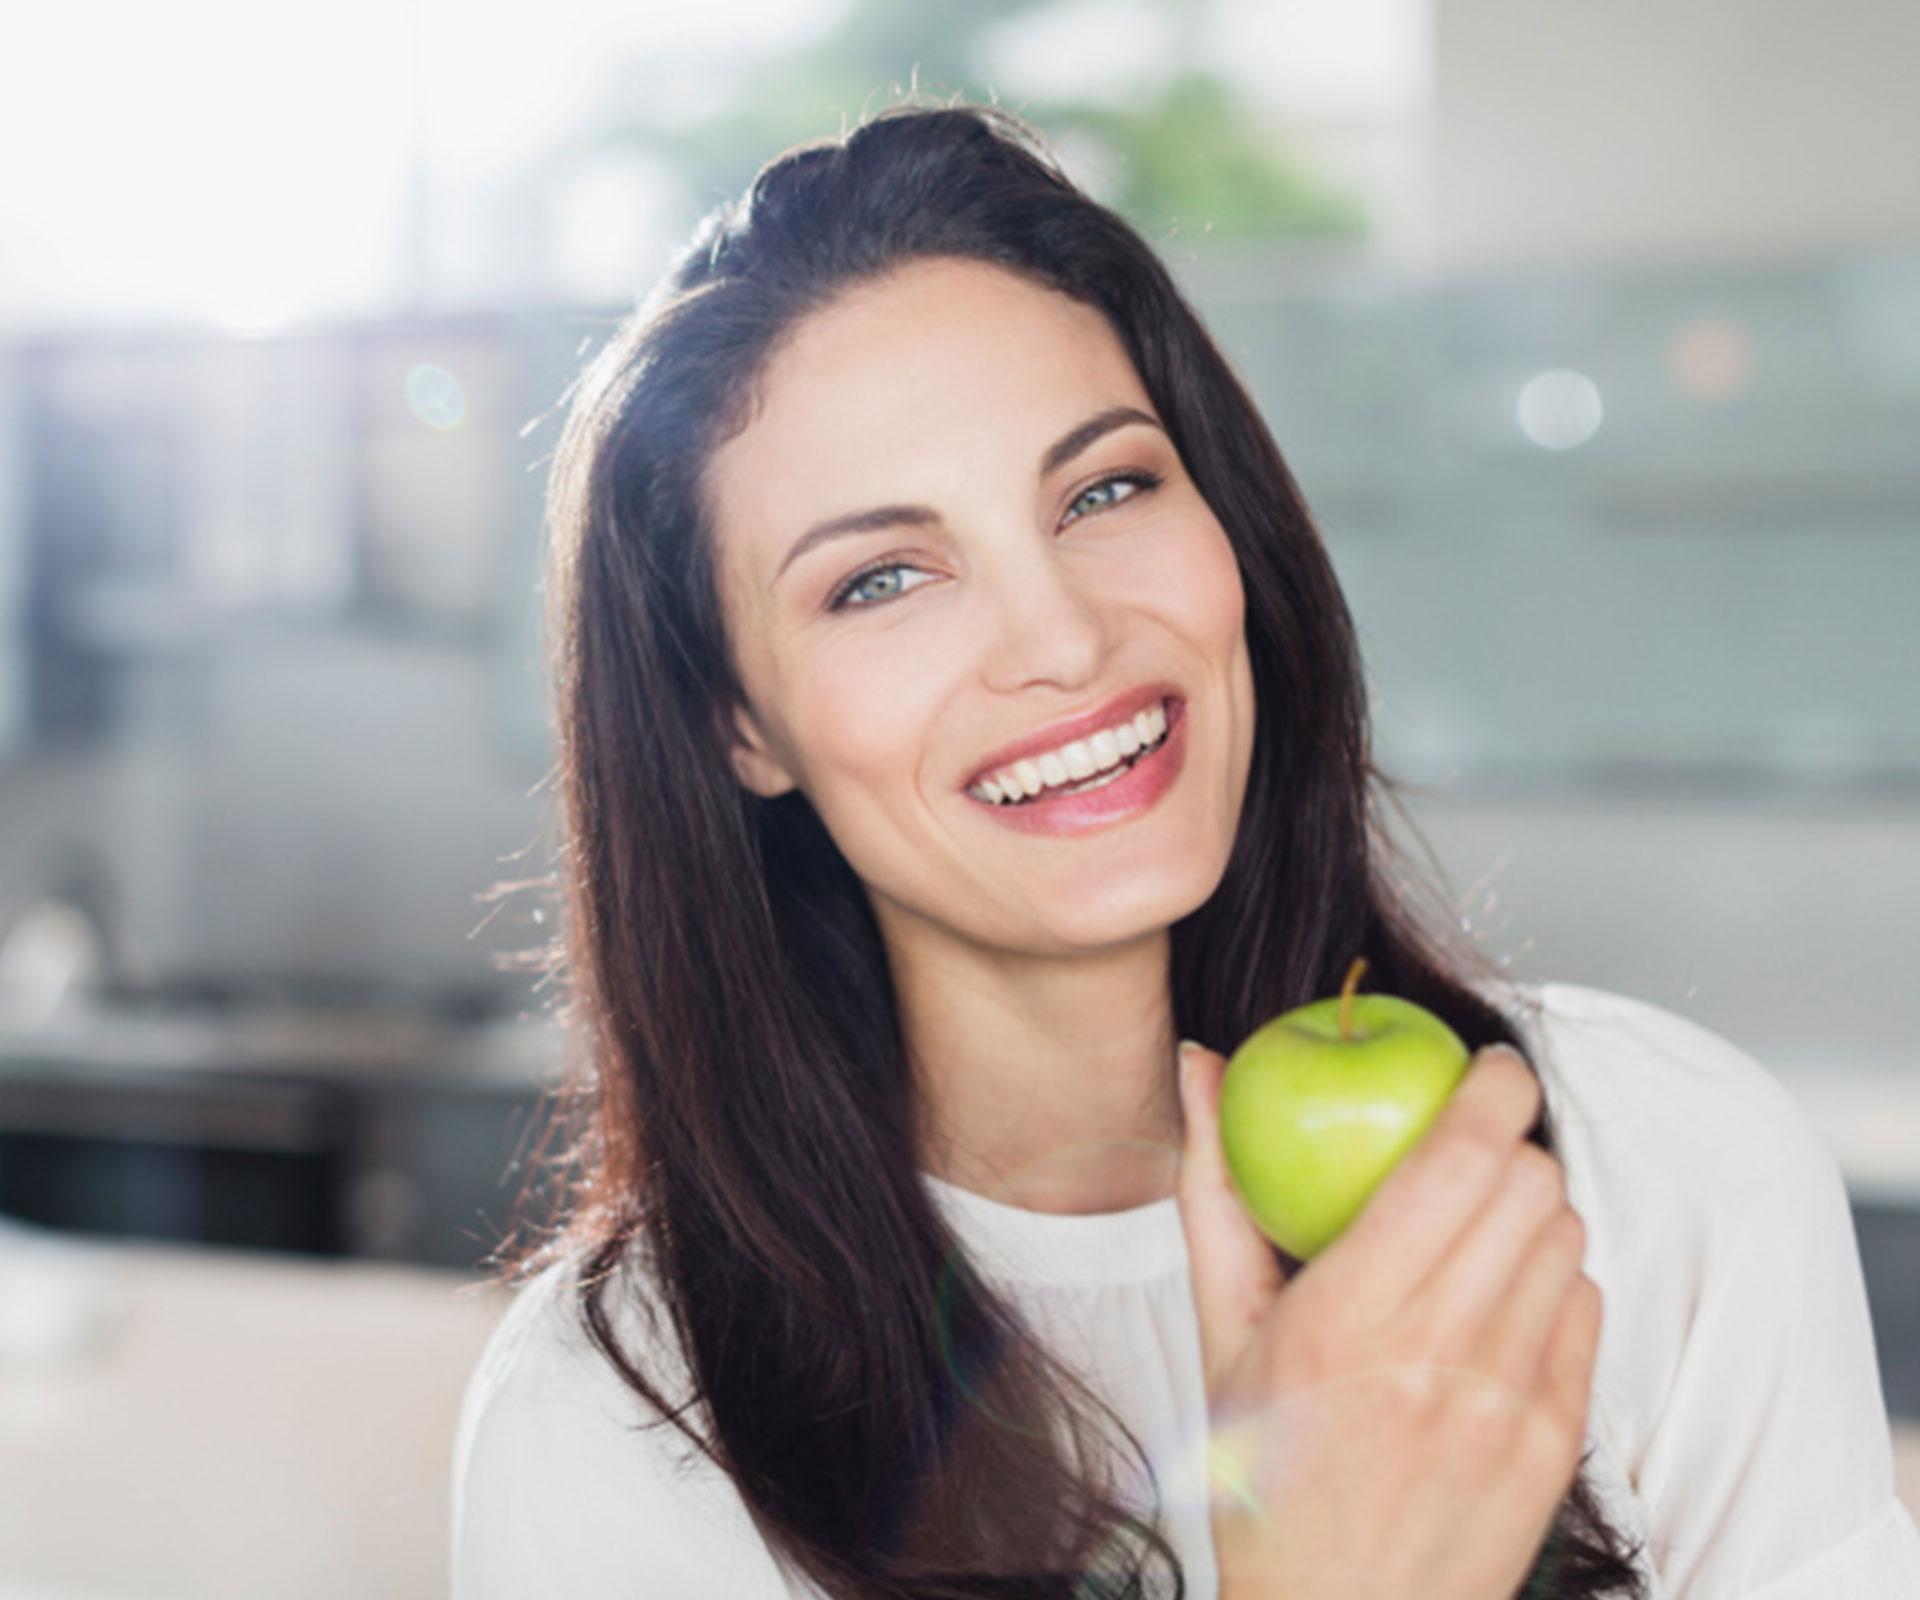 Food dos and don'ts for whiter teeth